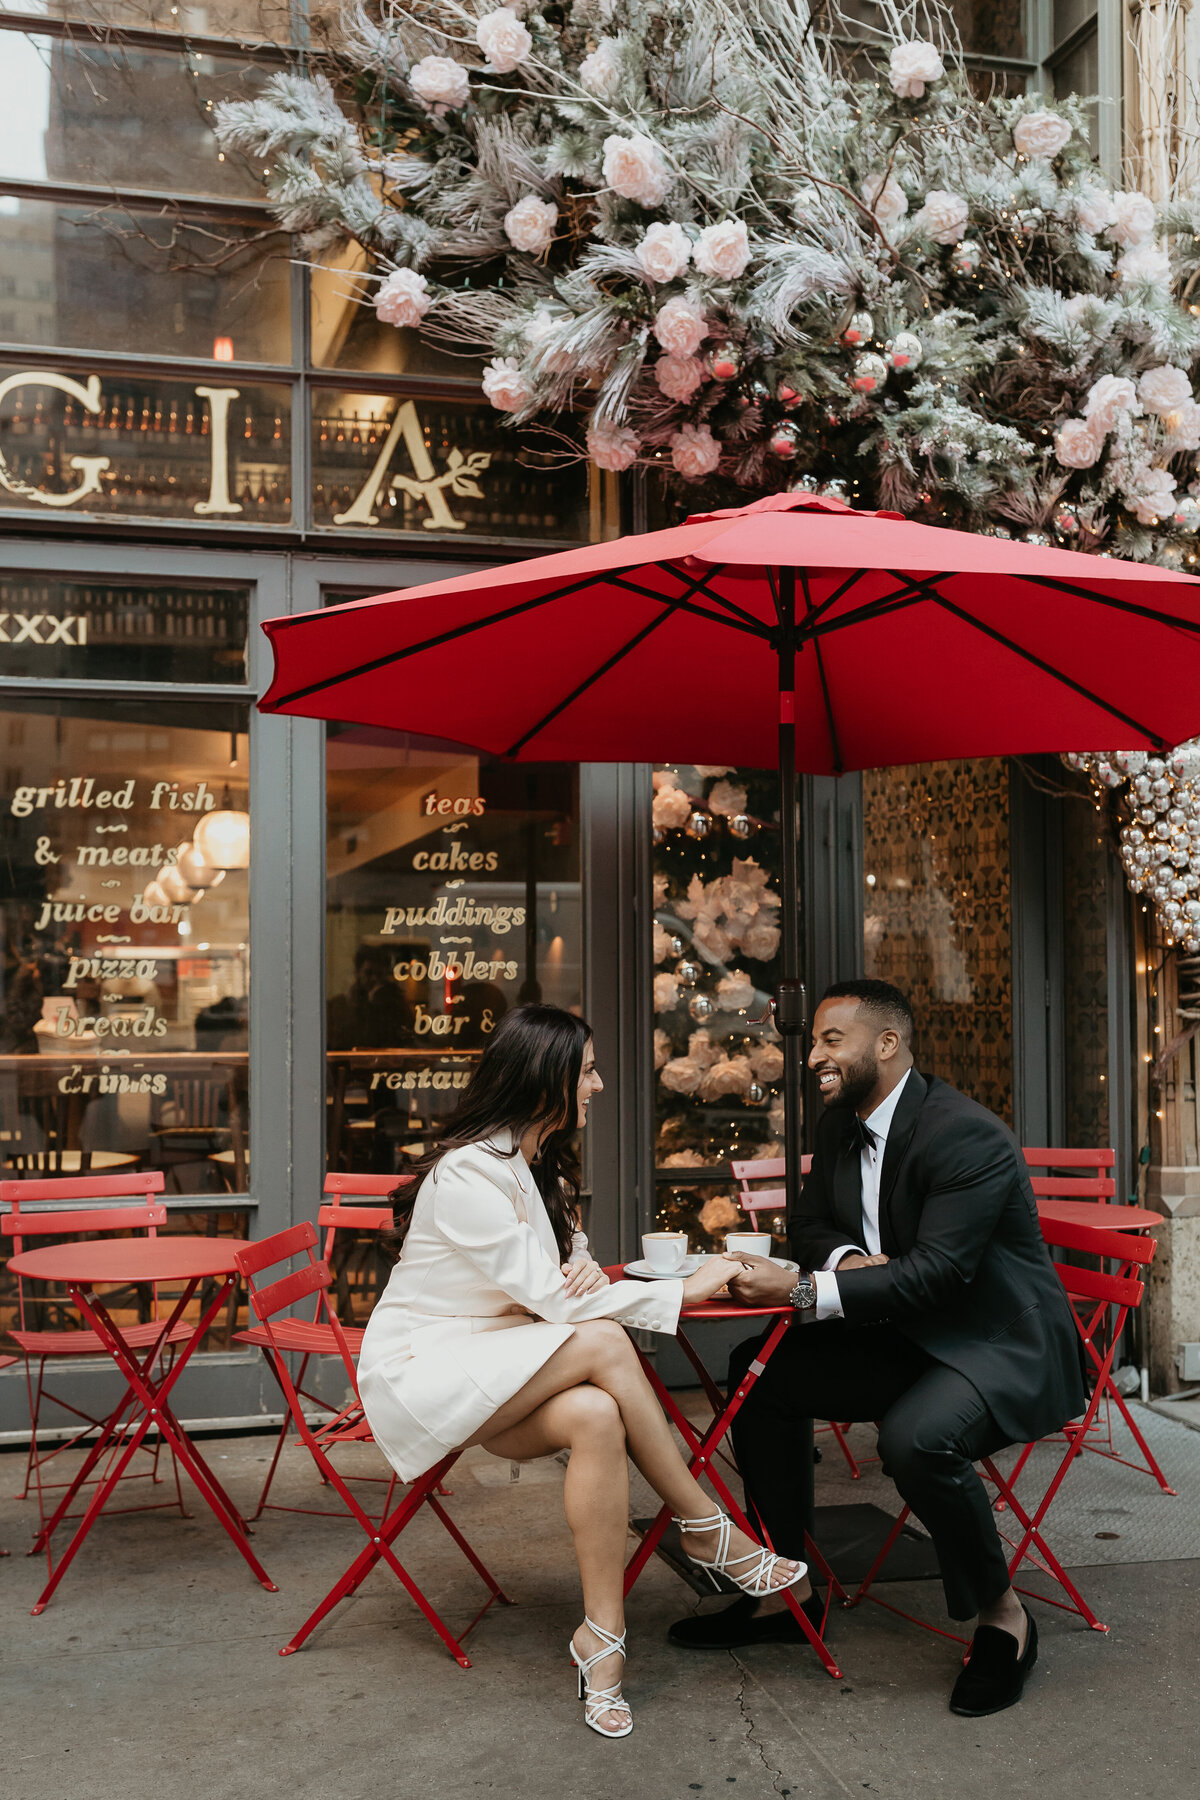 Coffee Date at Red Cafe Table in New York City